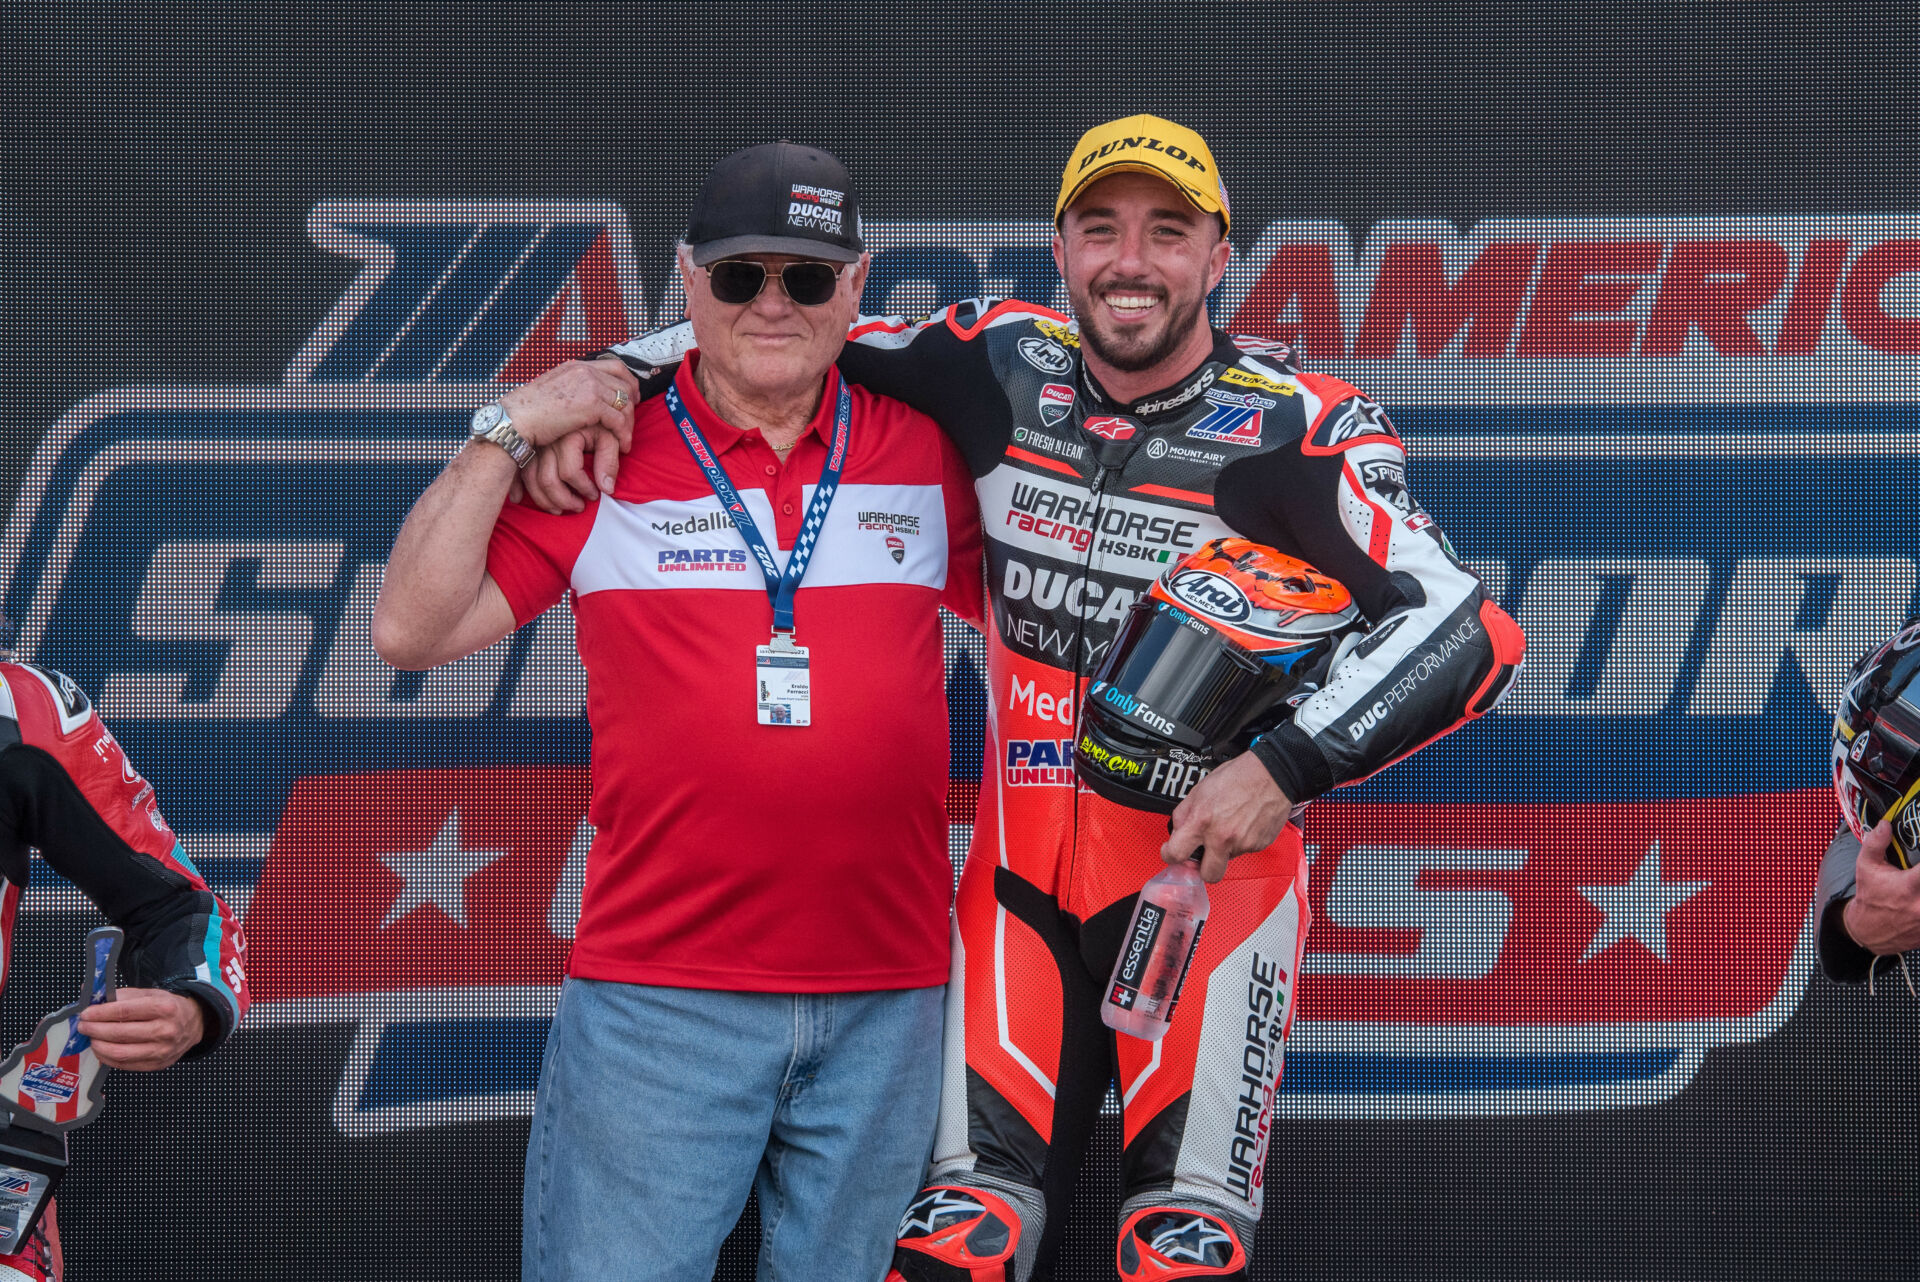 Eraldo Ferracci, seen here with Josh Herrin (right) following MotoAmerica Supersport Race One at Road Atlanta in 2022, is one of the AMA Hall of Fame Class of 2023 nominees. Photo by Brian J. Nelson.